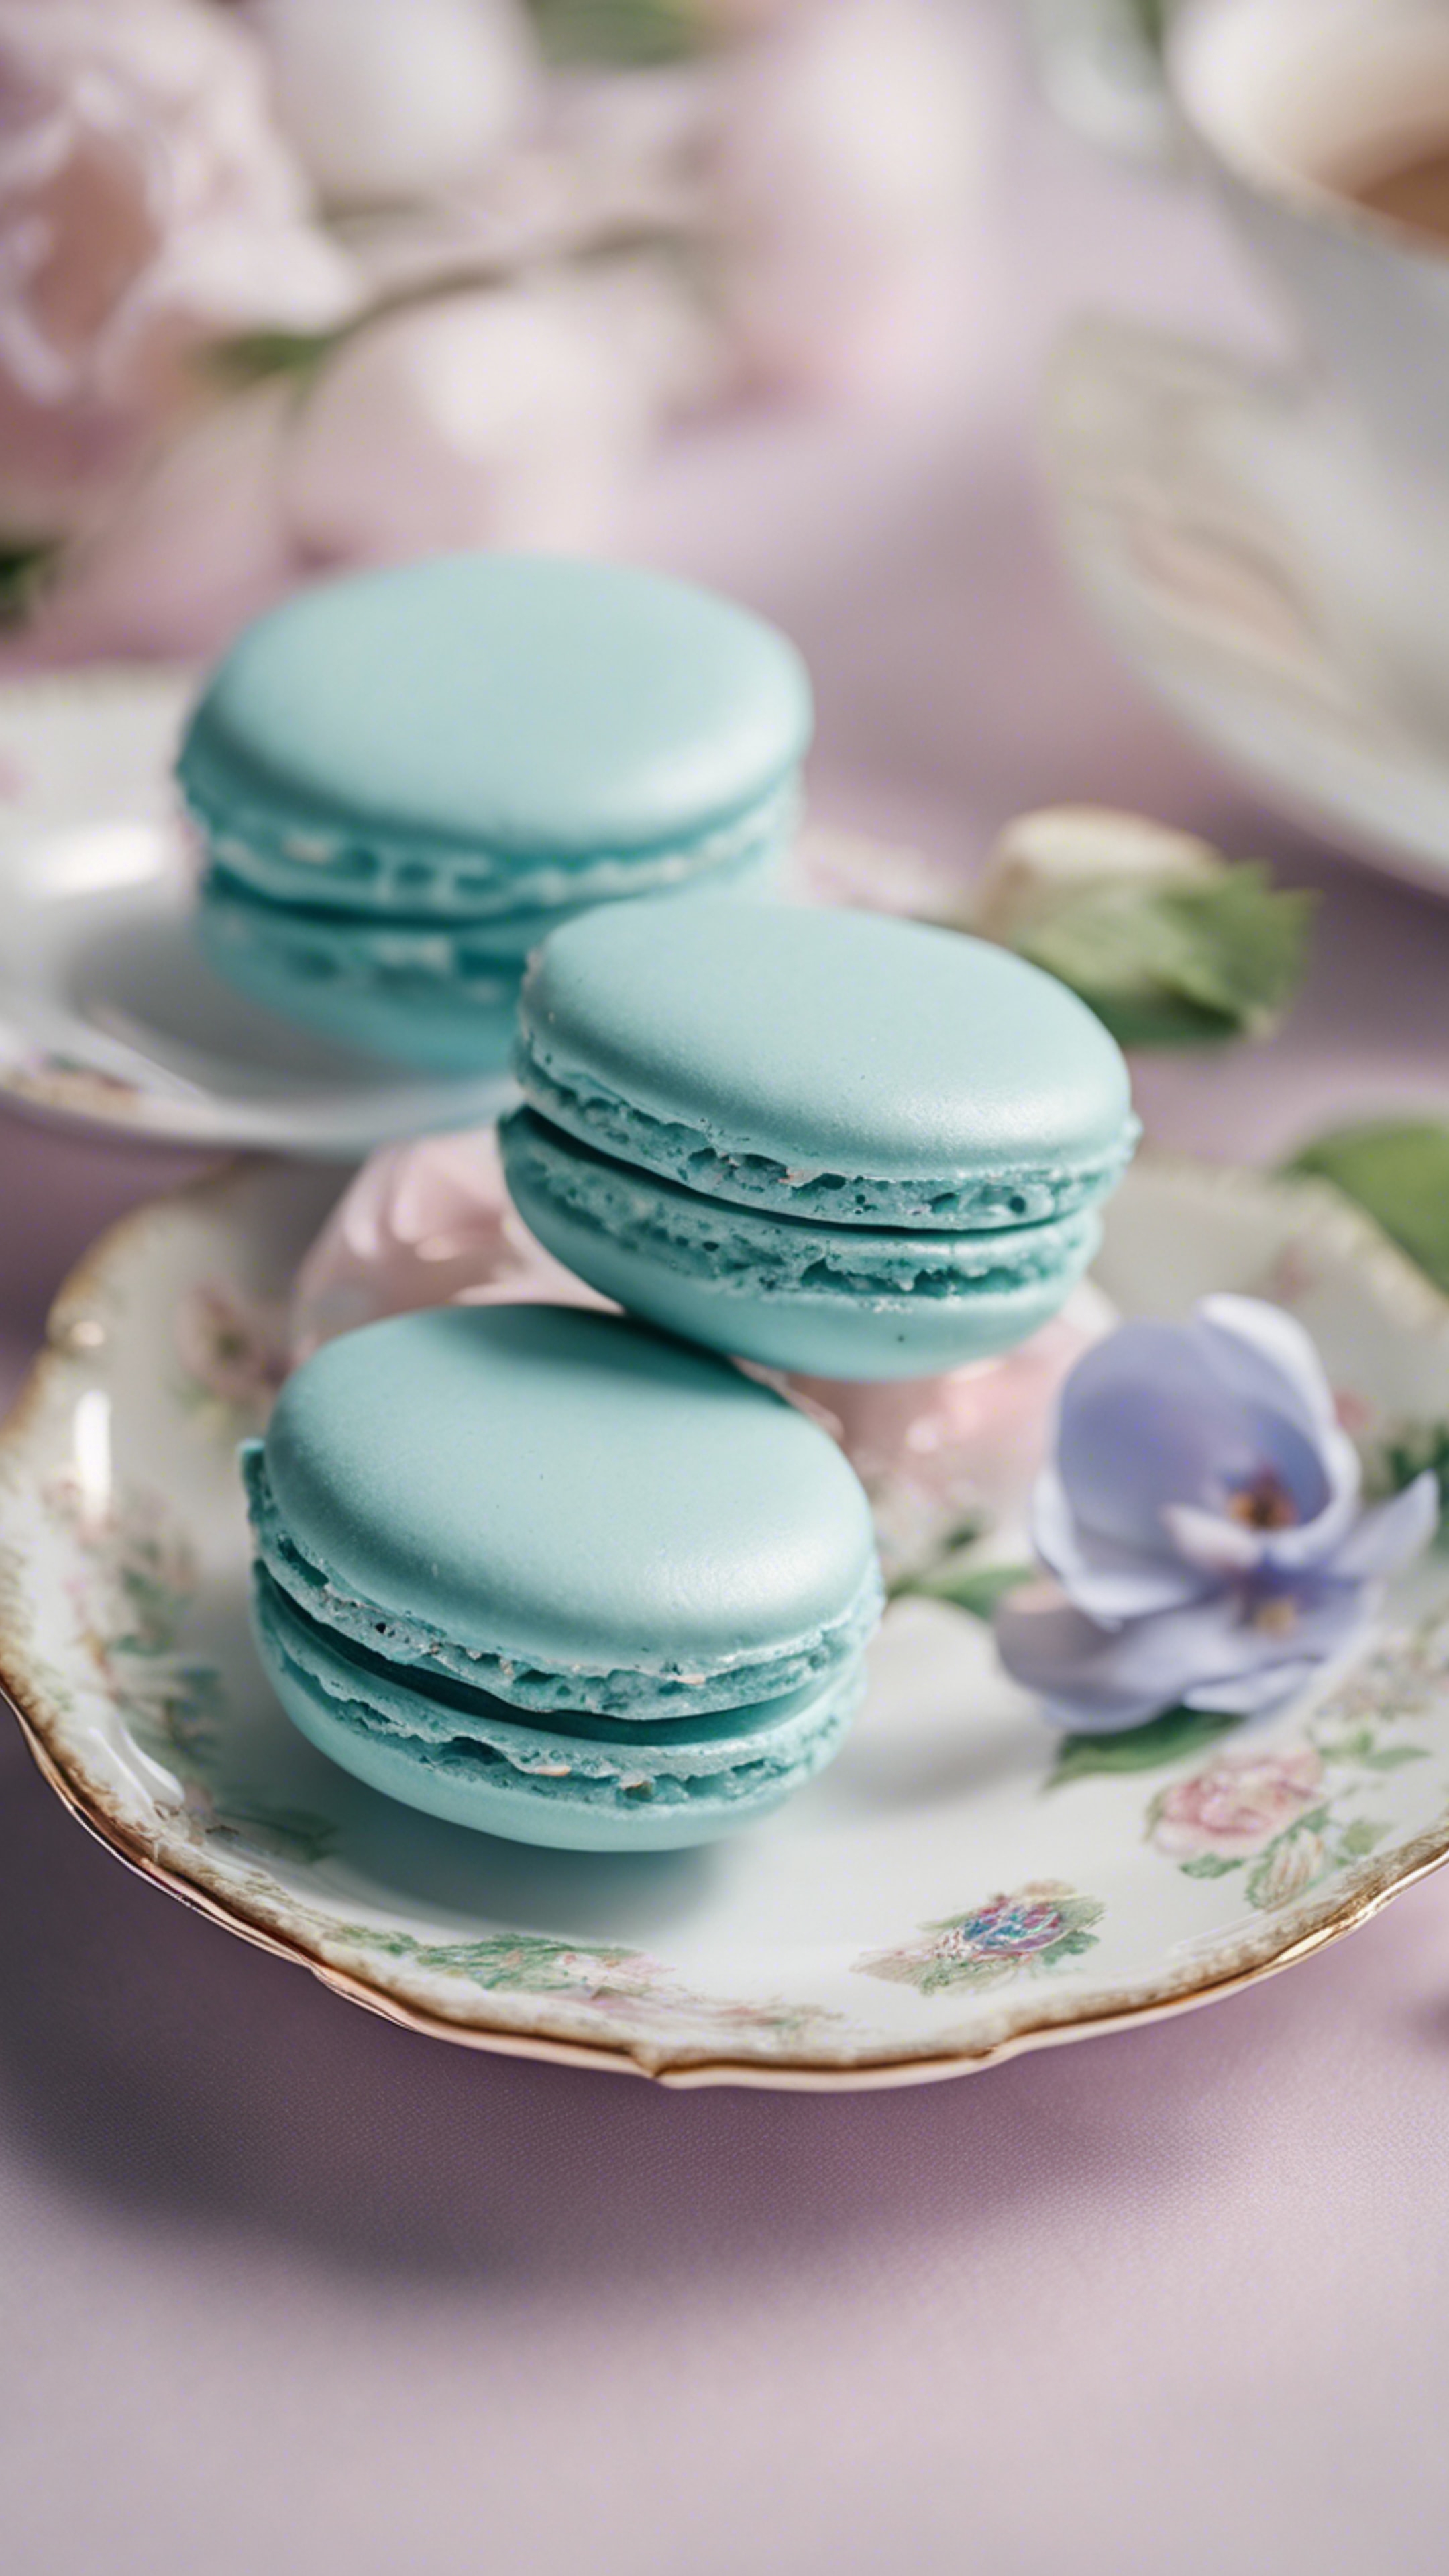 A pair of pastel blue French macarons on a dainty floral china plate. ផ្ទាំង​រូបភាព[cc240826fa4e4ee284e3]